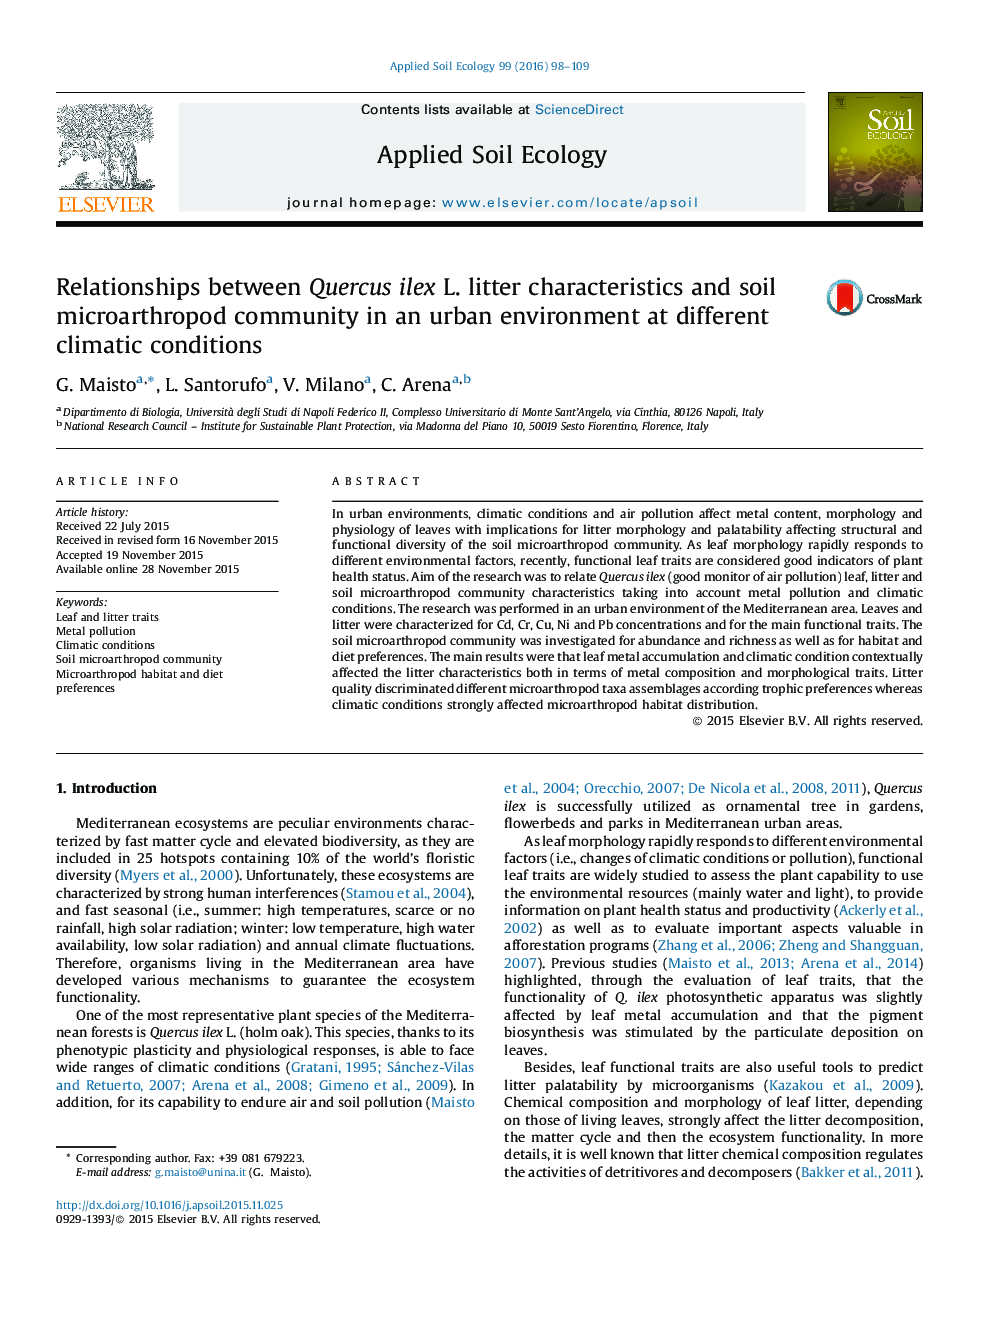 Relationships between Quercus ilex L. litter characteristics and soil microarthropod community in an urban environment at different climatic conditions